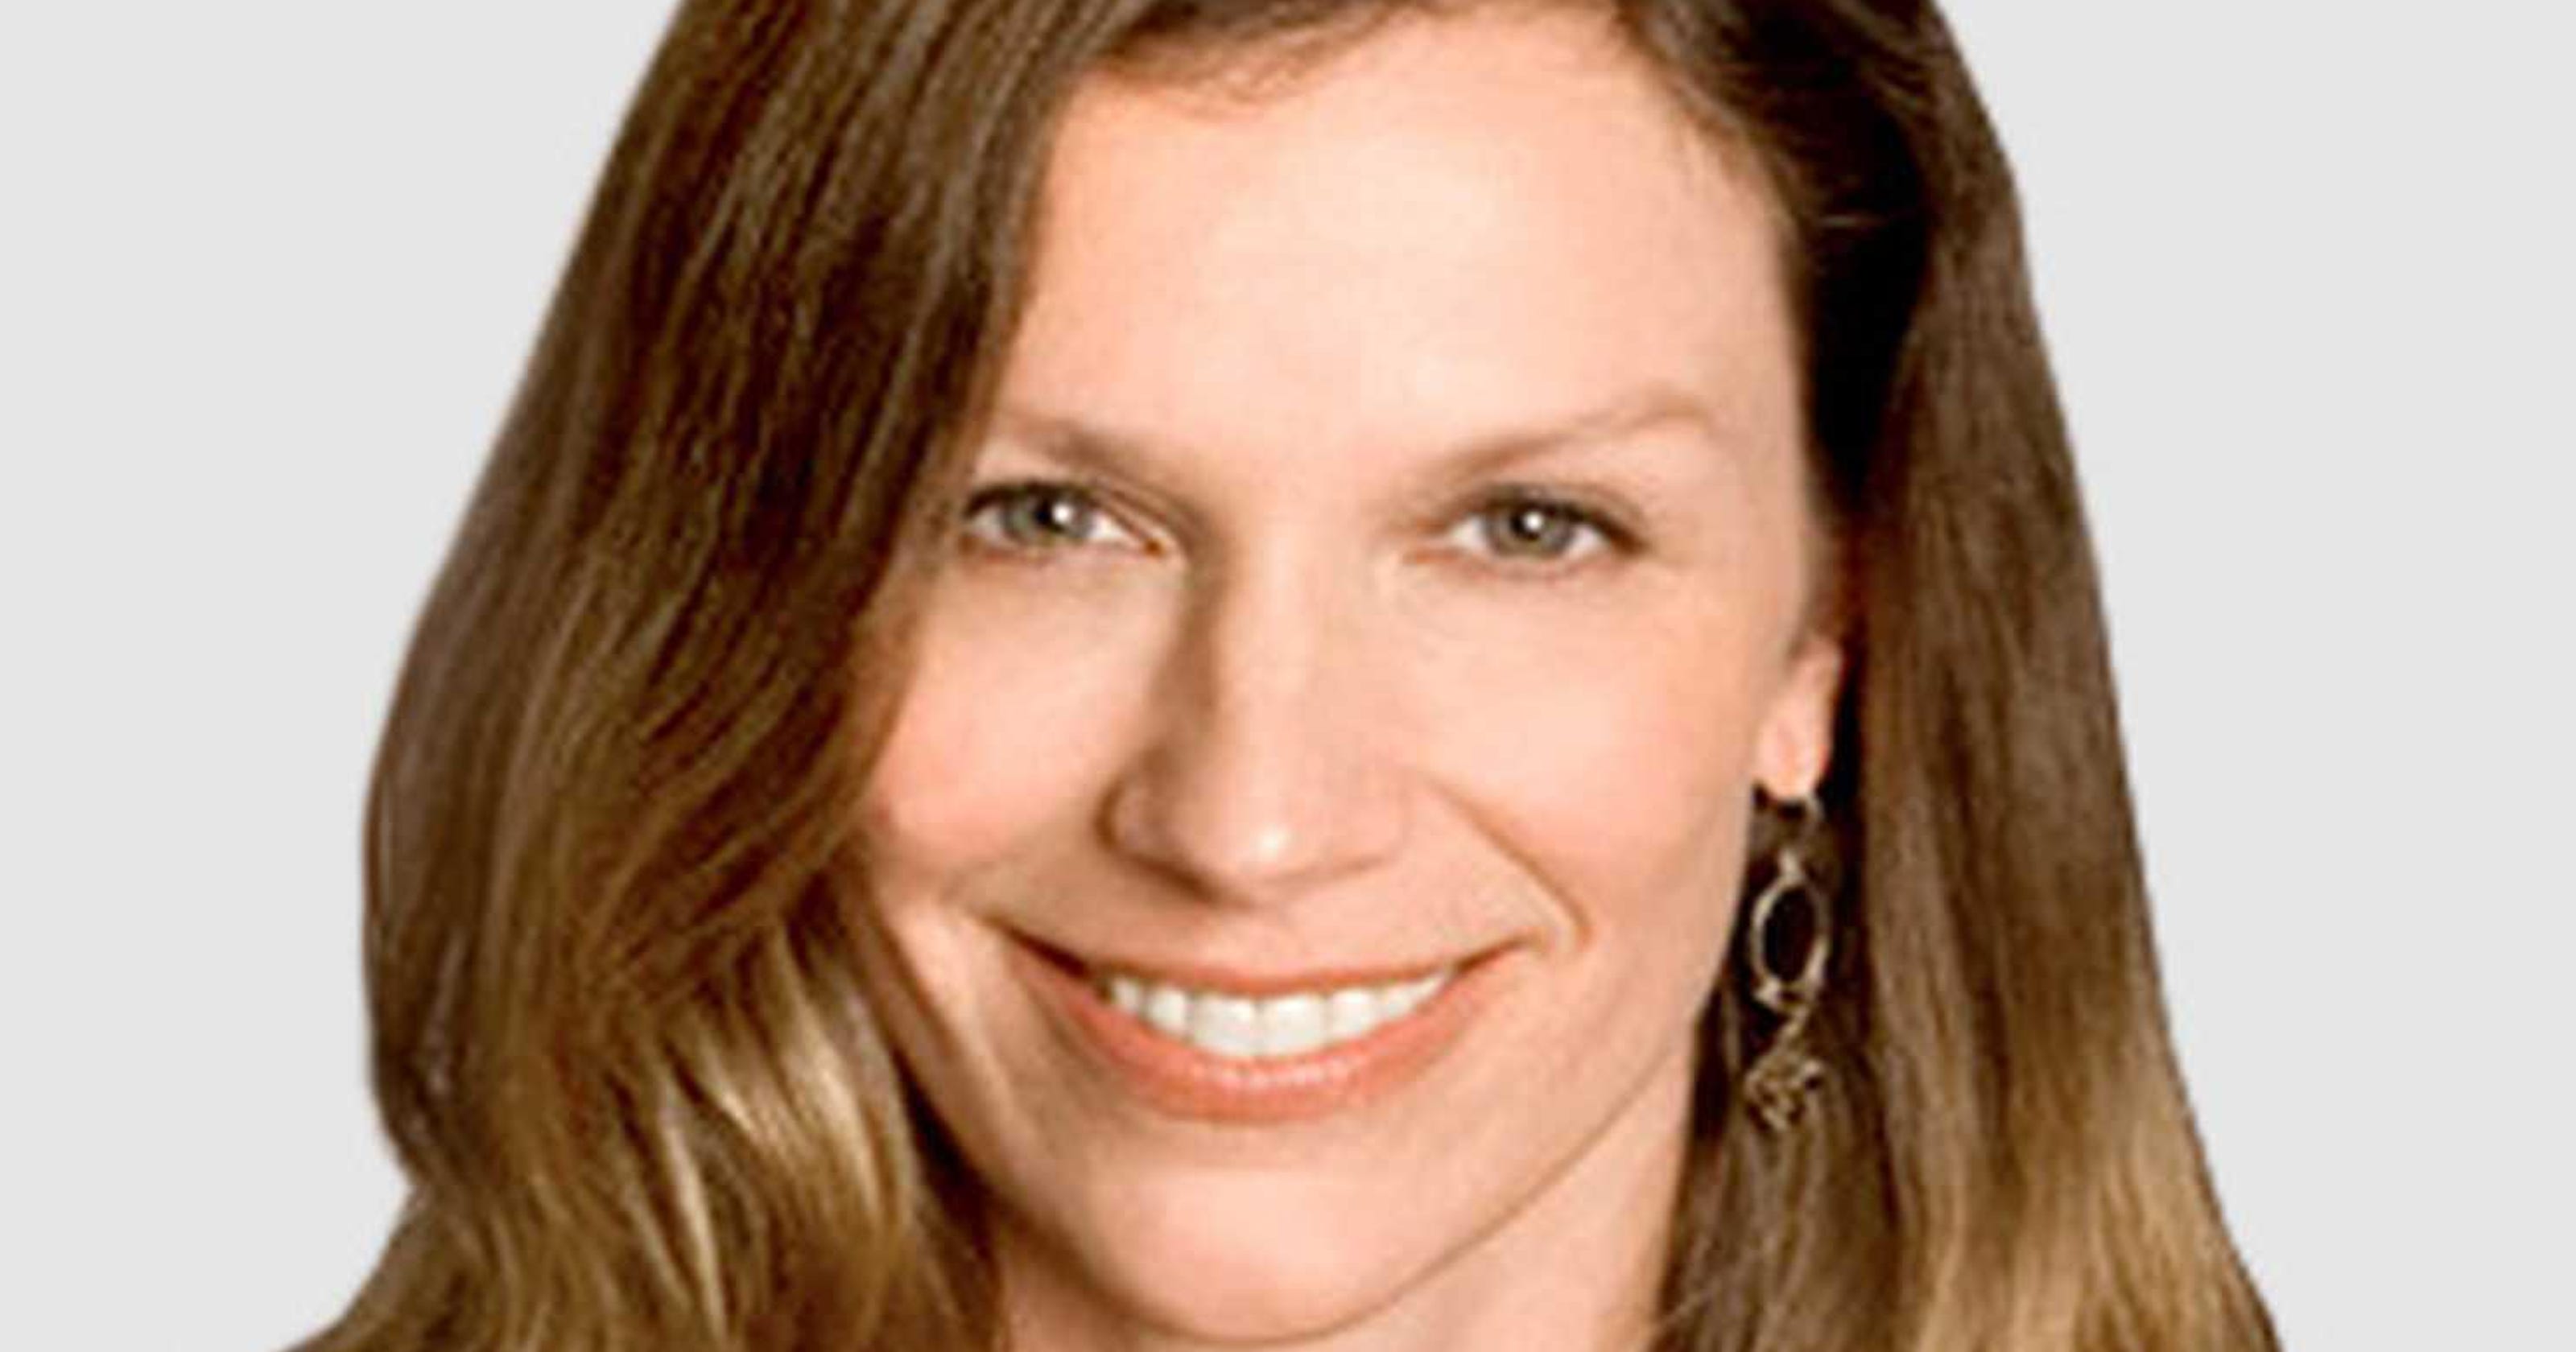 Carolyn Hax What To Do About Our Exhibitionist Neighbor